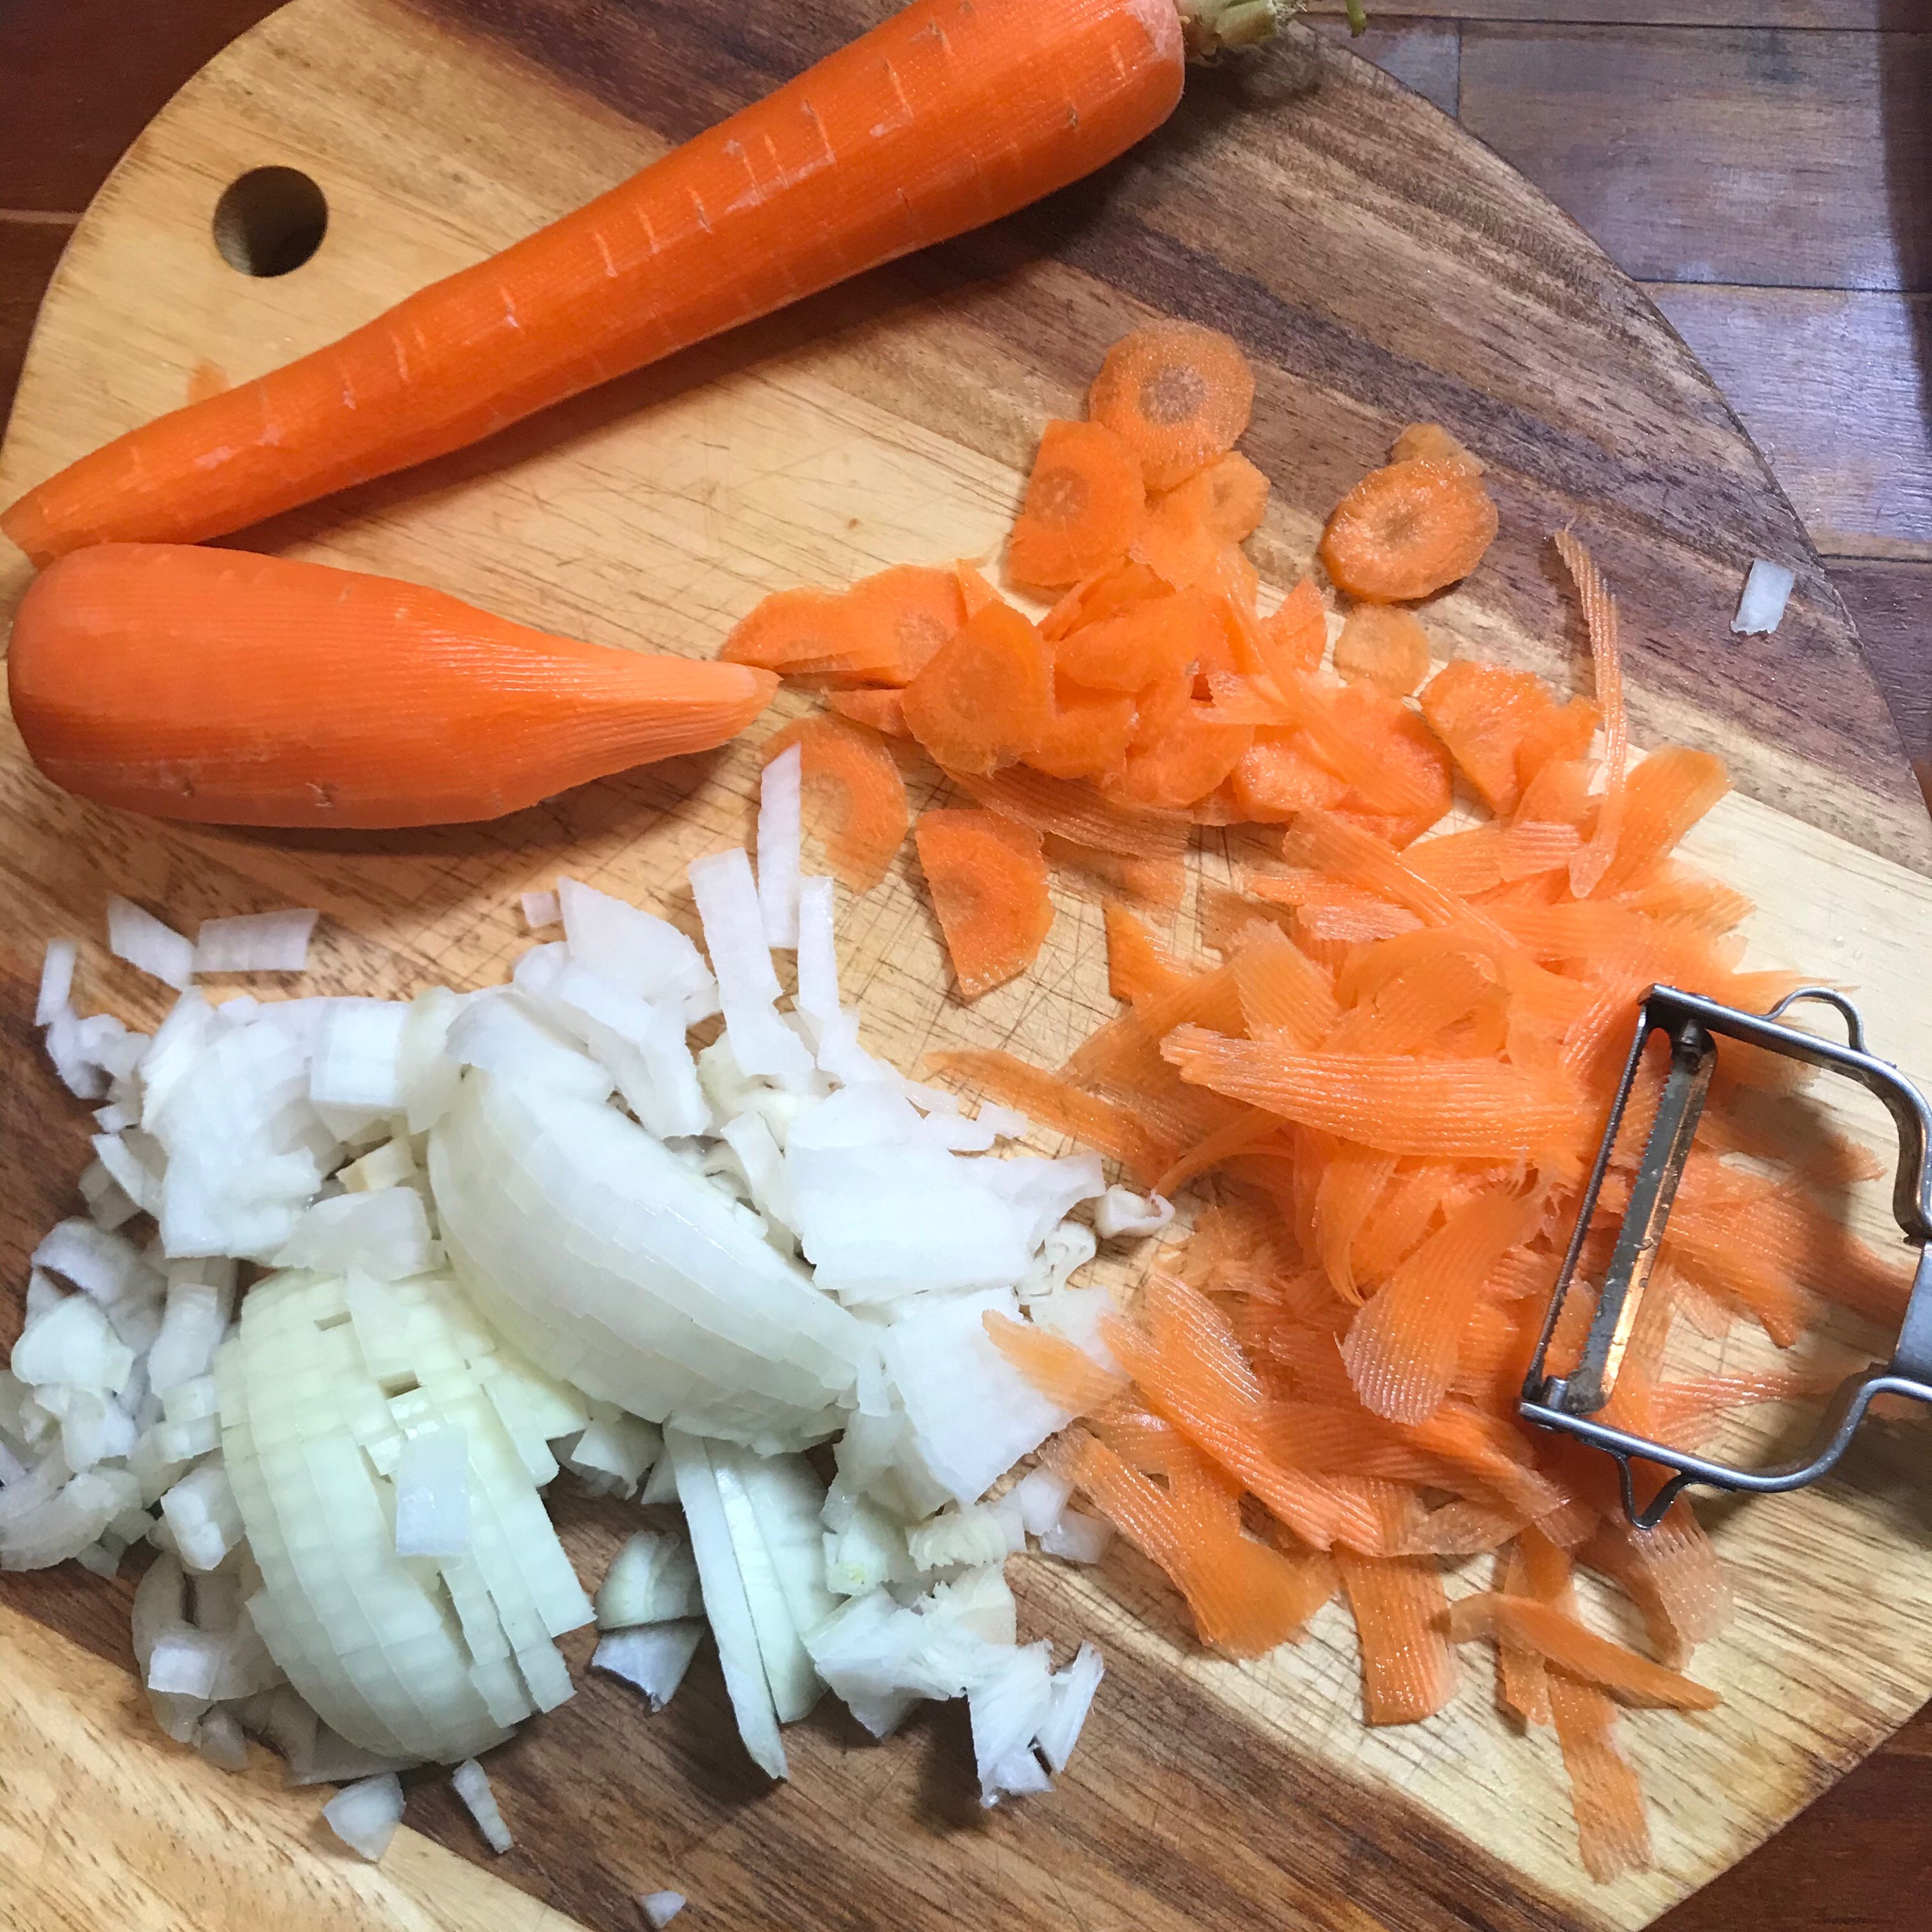 Chop the onion and carrots